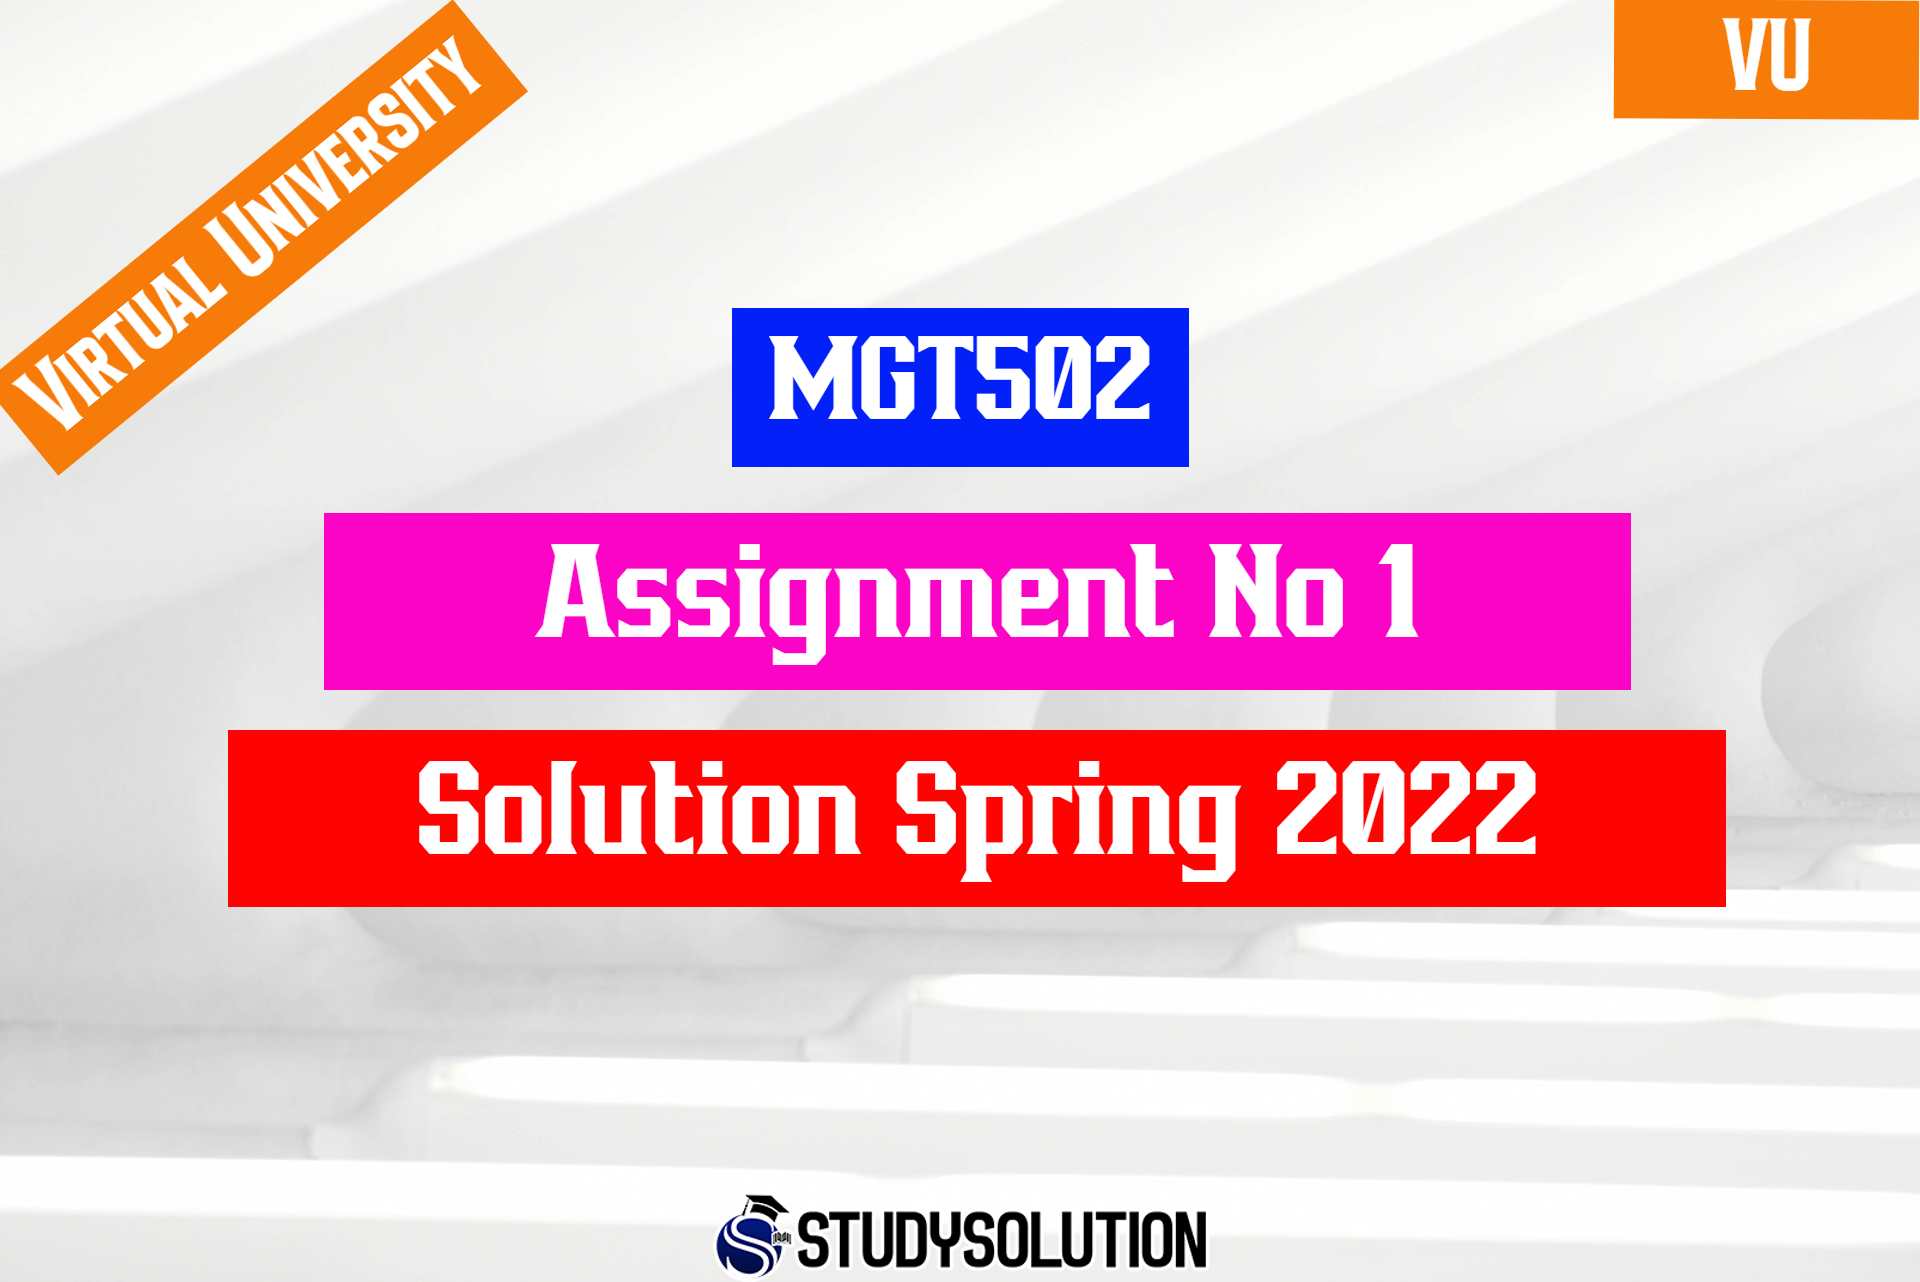 MGT502 Assignment No 1 Solution Spring 2022